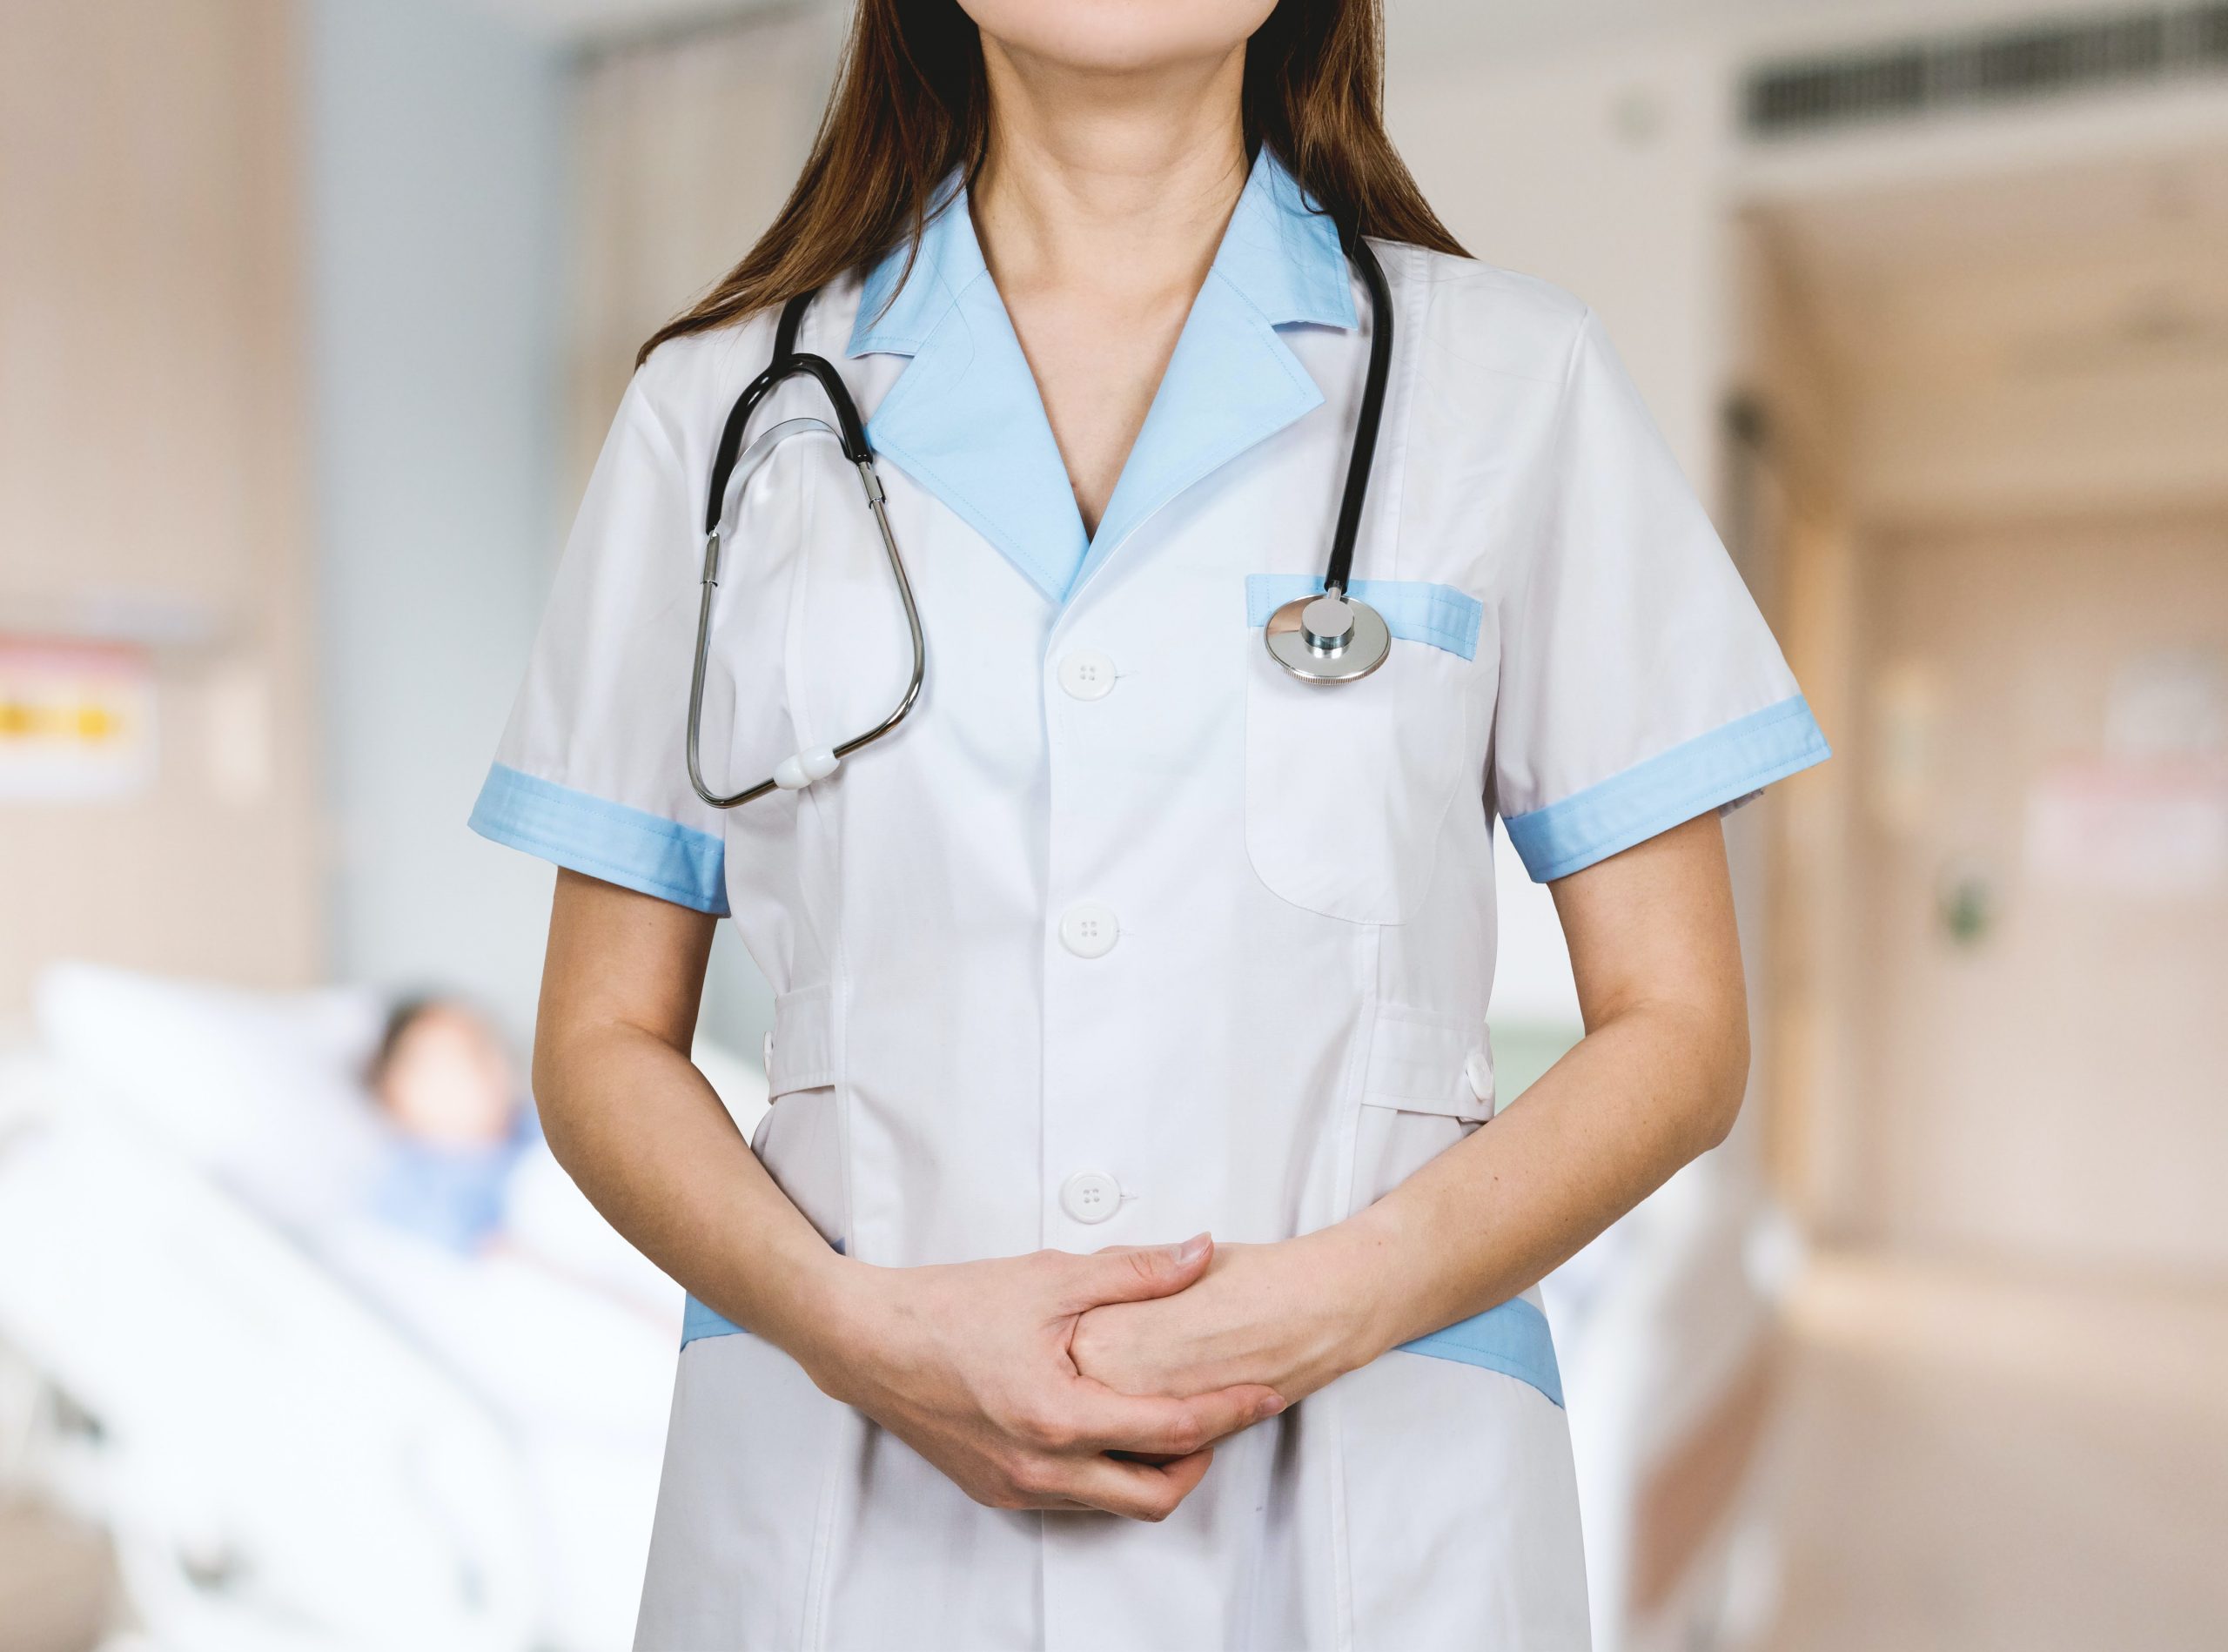 Most Common Career Changes for Nurses